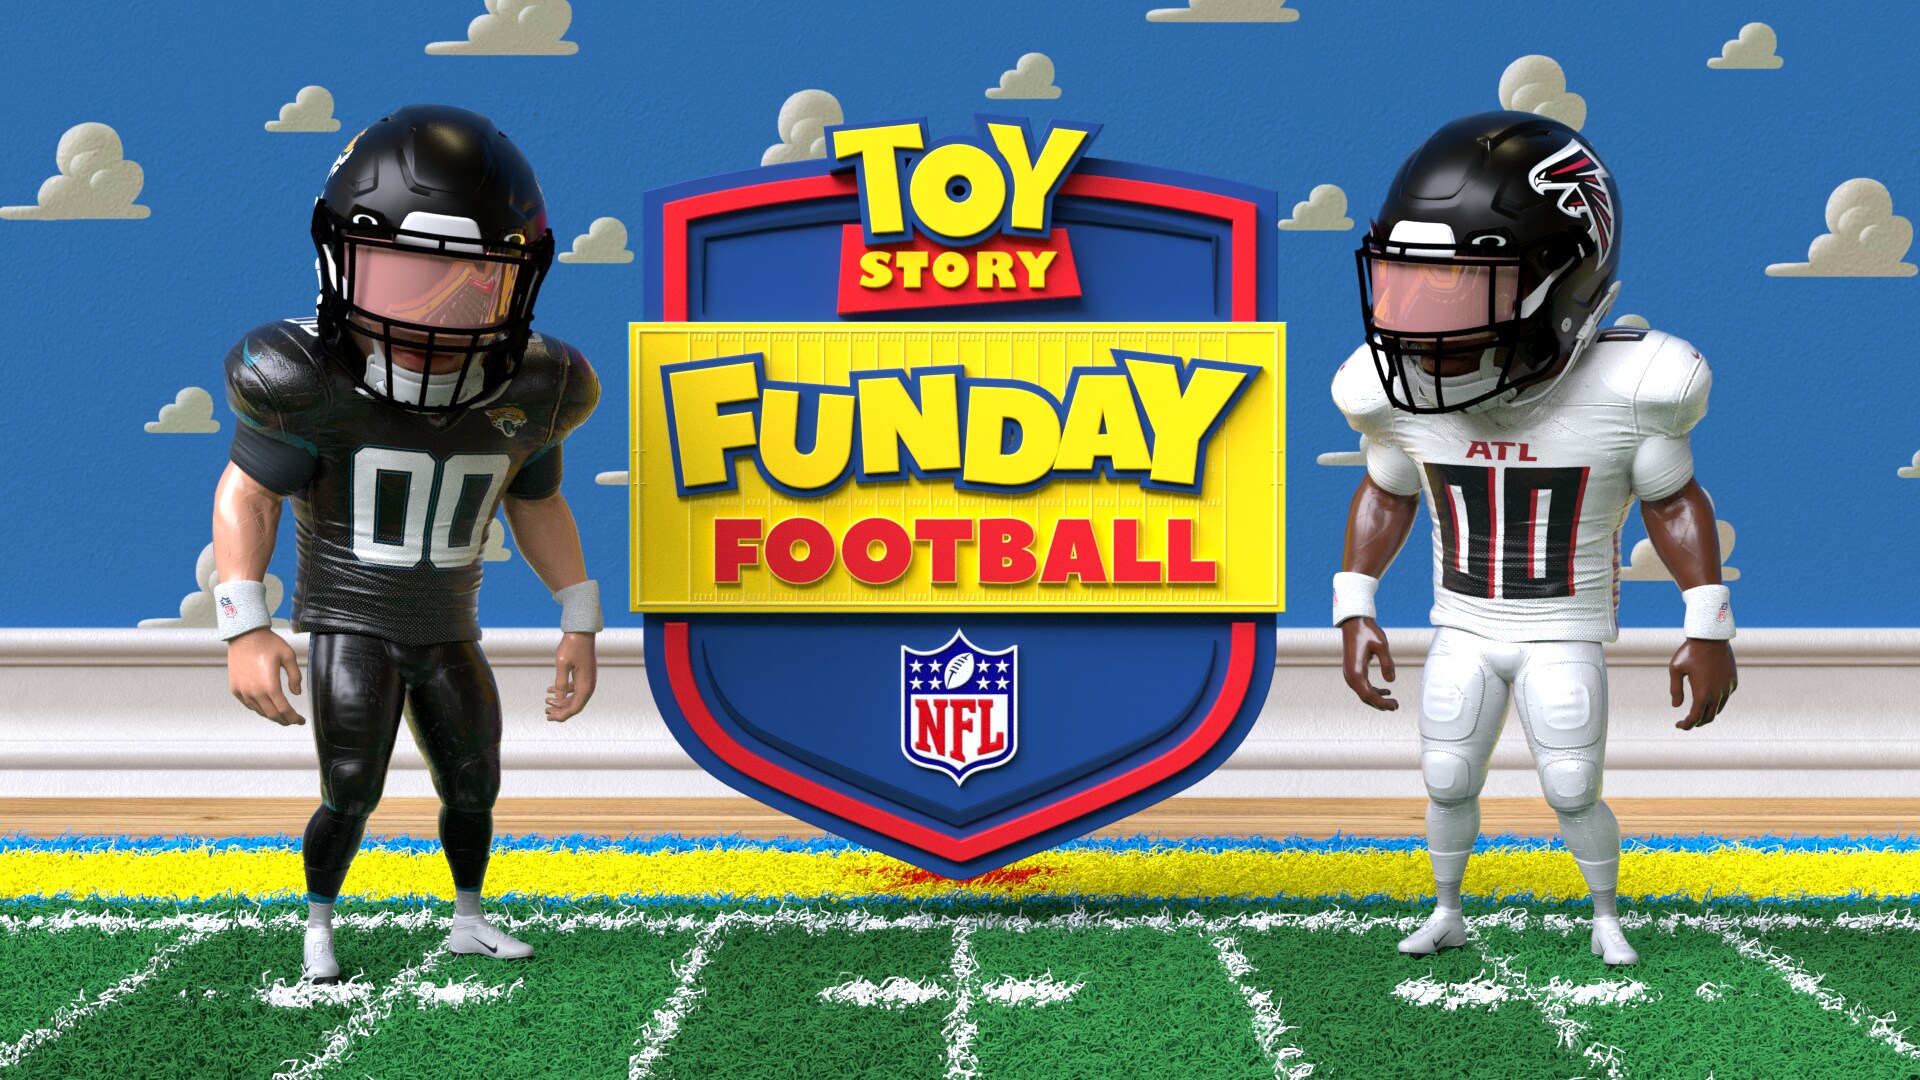 To Infinity and Beyond!” ESPN, The Walt Disney Company, and the NFL are Bringing Fans a First-of-its-Kind, Fully-Animated Alternate NFL Game Presentation of the Falcons and Jaguars in Pixars Iconic “Toy Story”